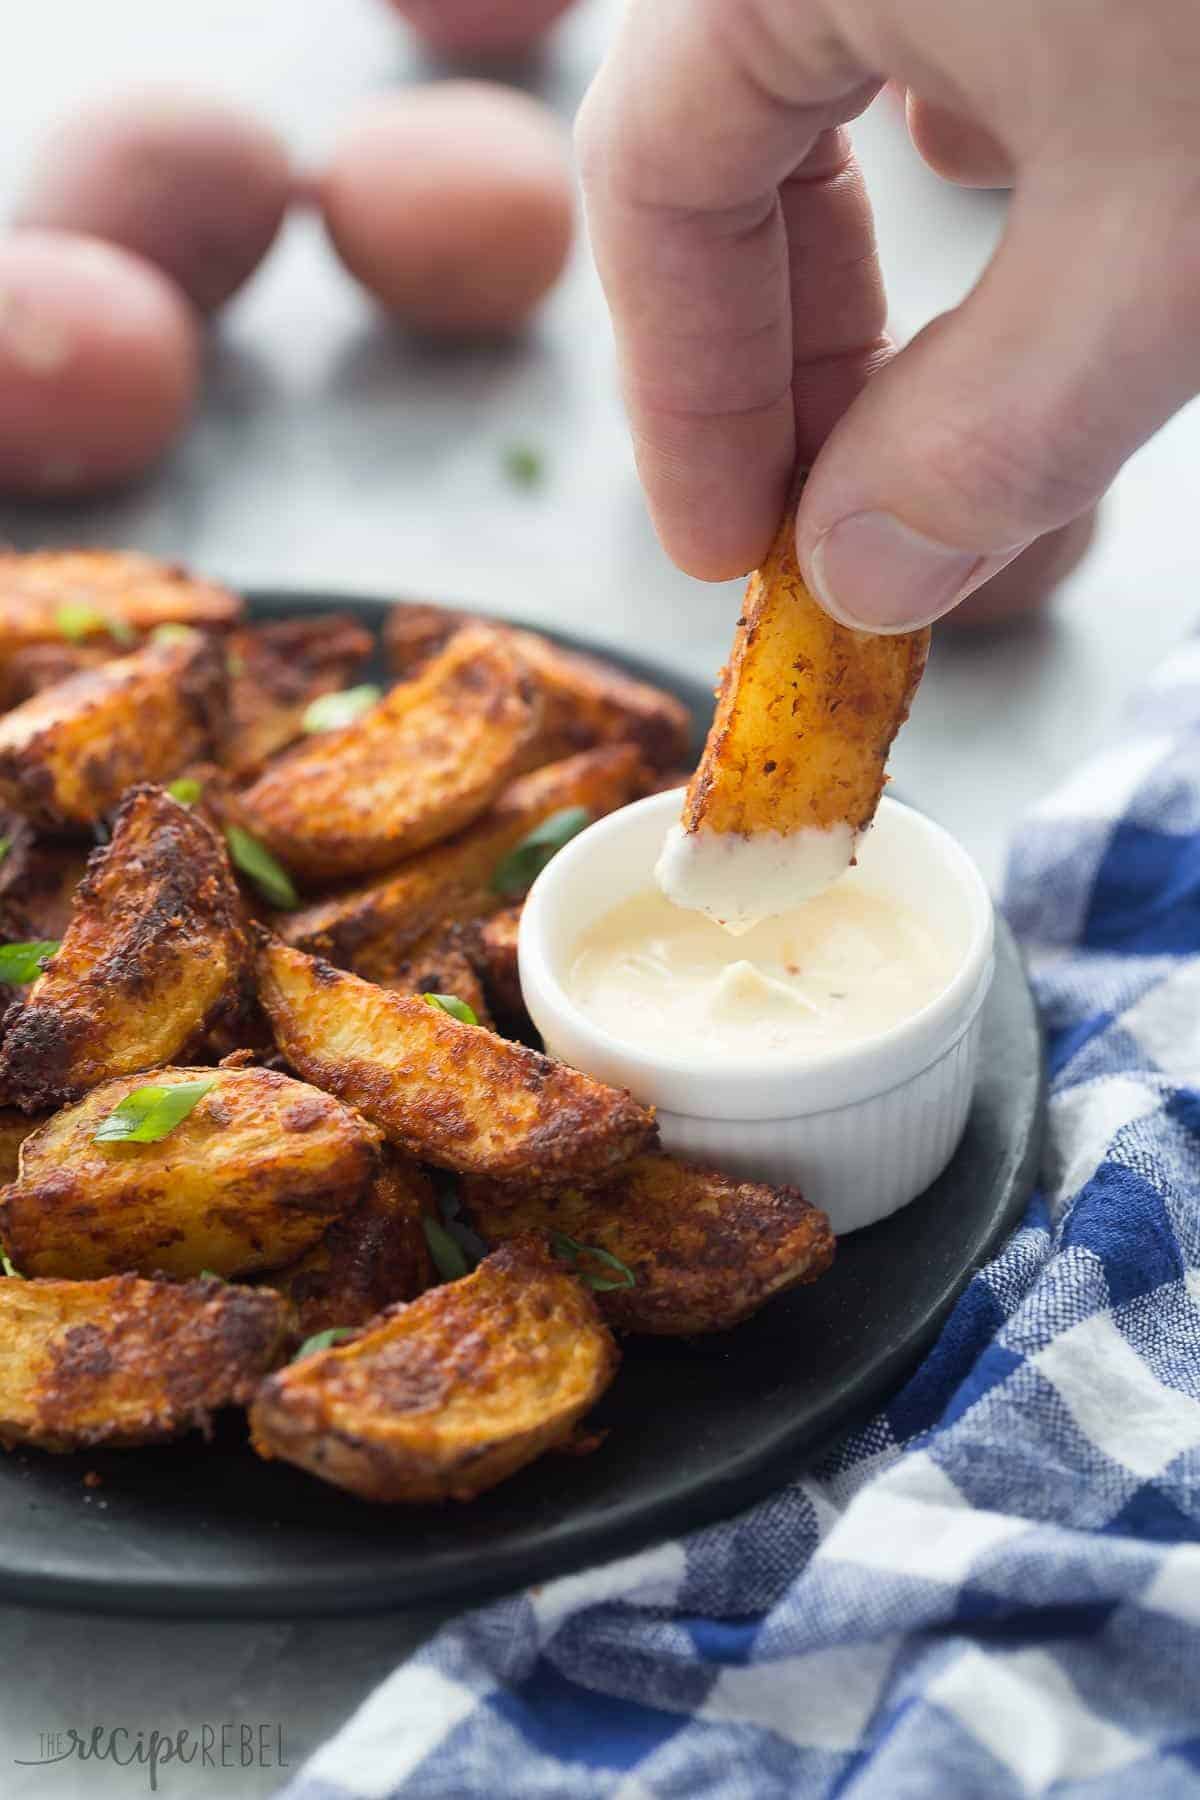 hand dipping chipotle parmesan potato wedge into small bowl of creamy sauce